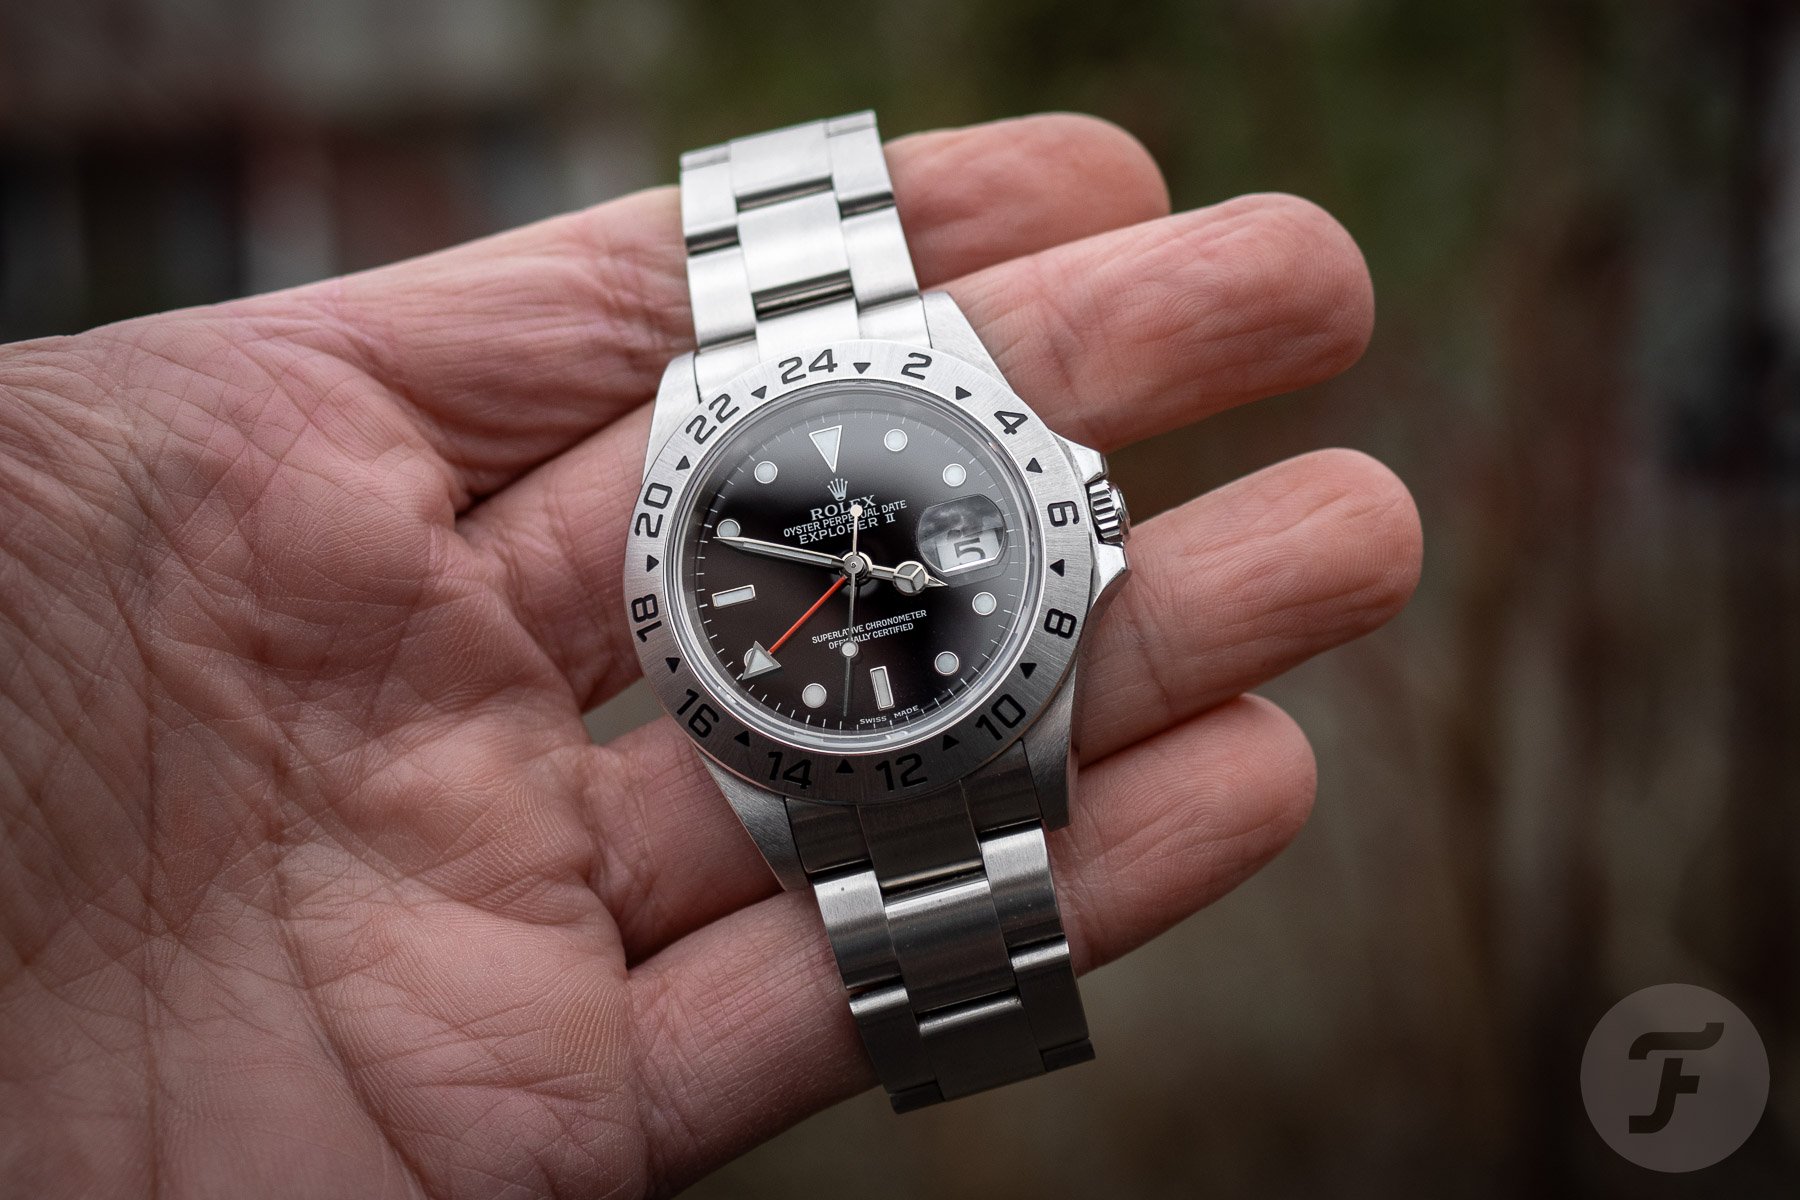 This Monday Morning, I Realized I Should Have Bought The Black-Dial Rolex Explorer II 16570 Instead Of The White One